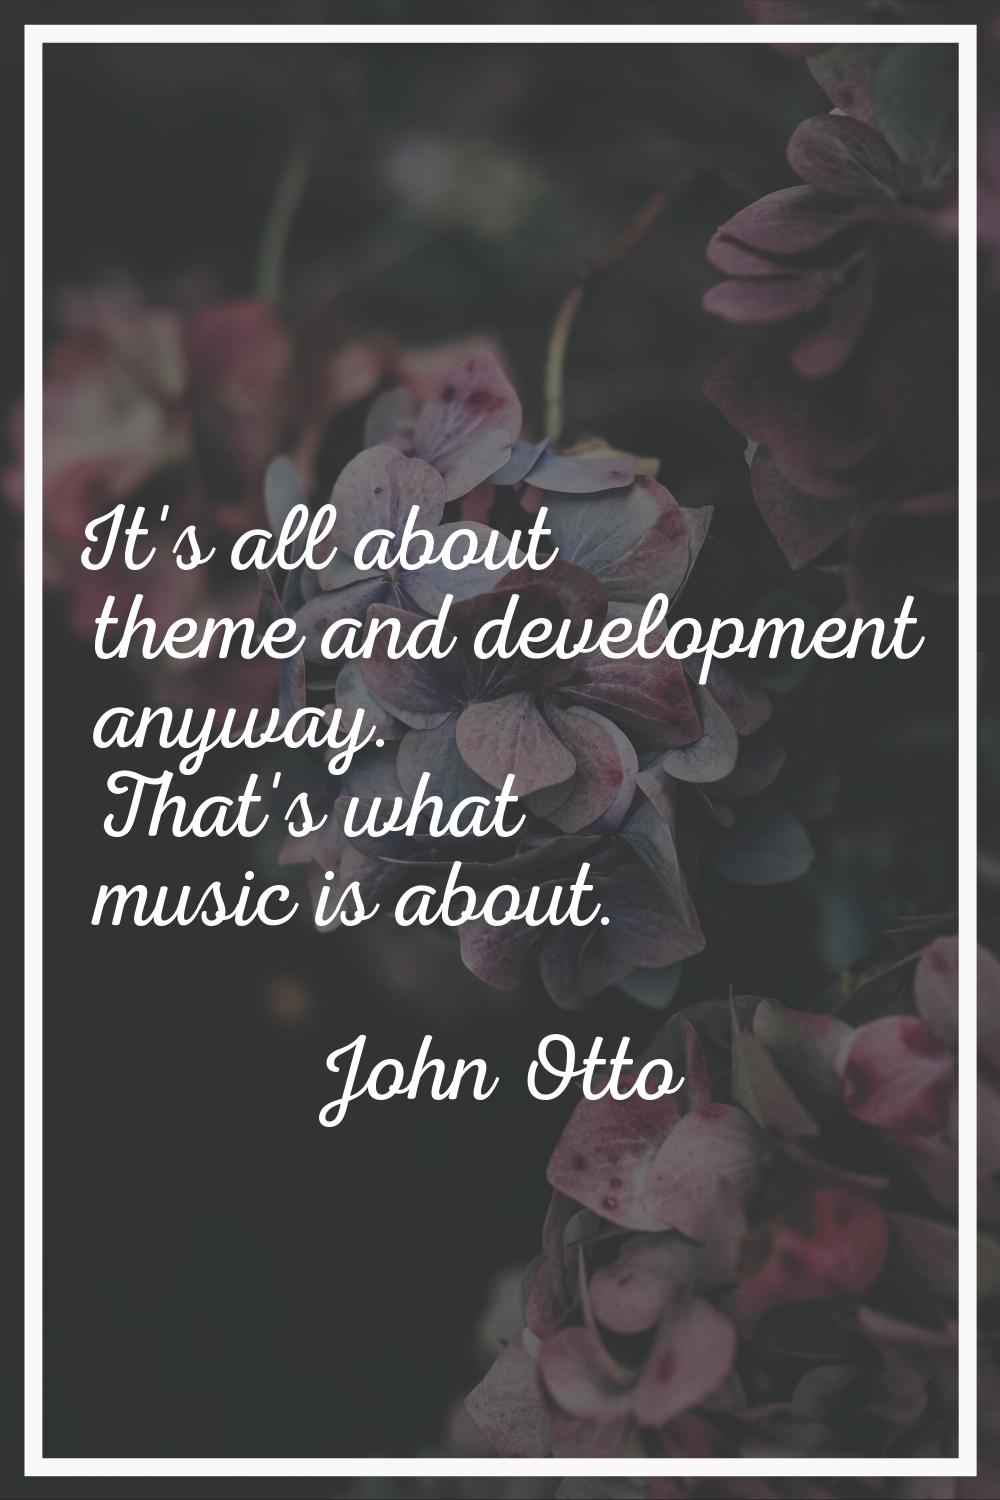 It's all about theme and development anyway. That's what music is about.